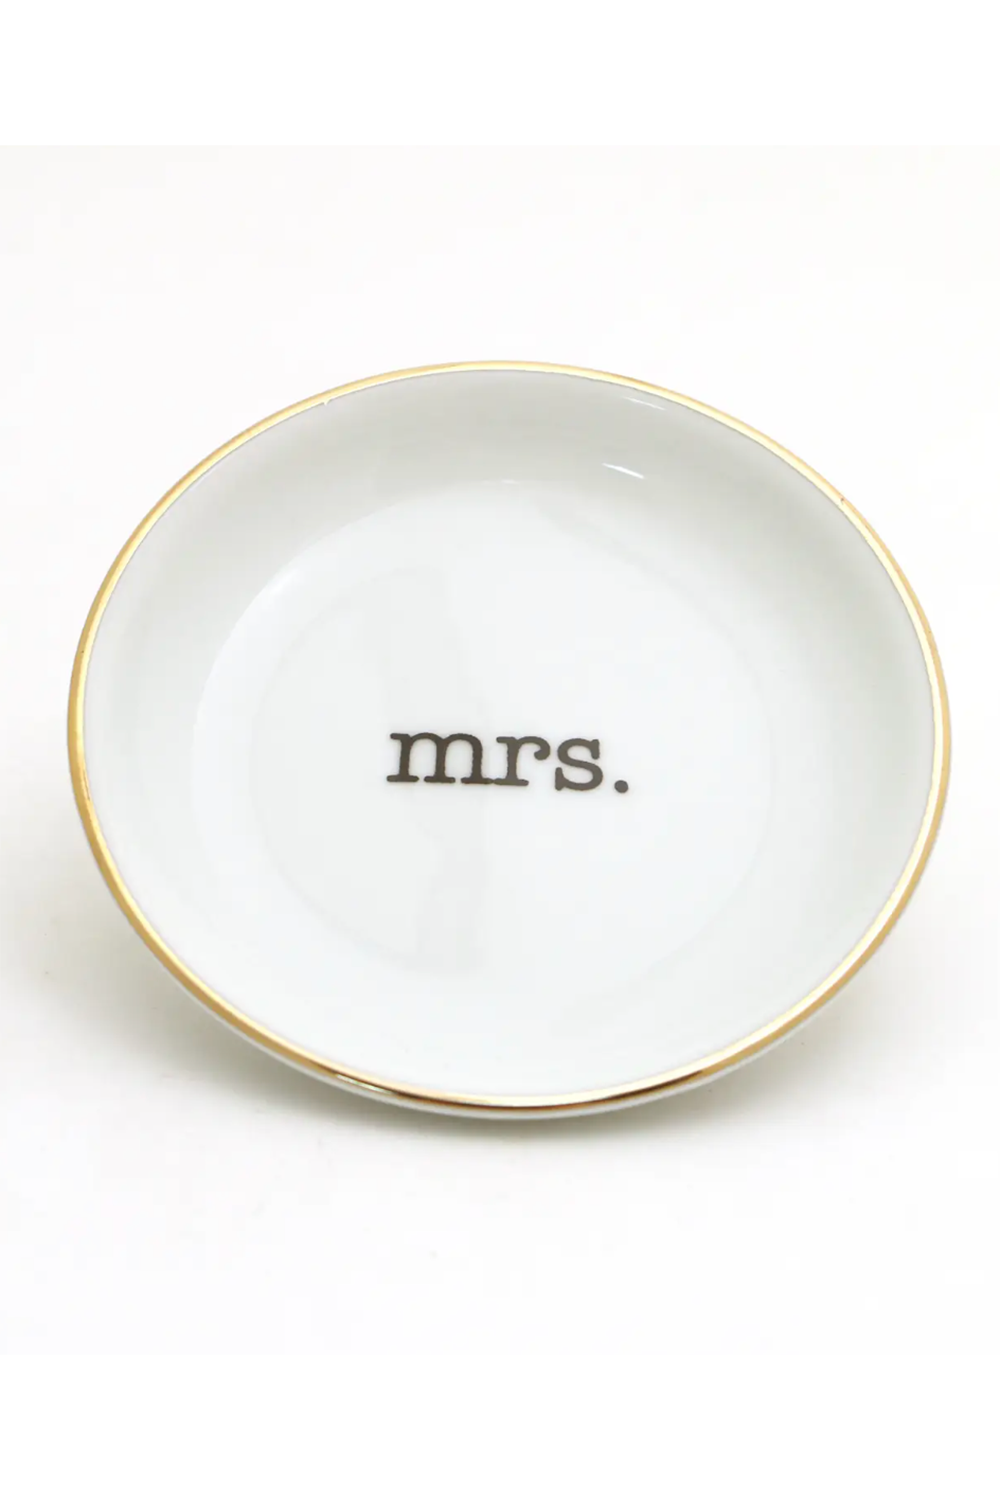 MRS Ring Dish with Gold Accents